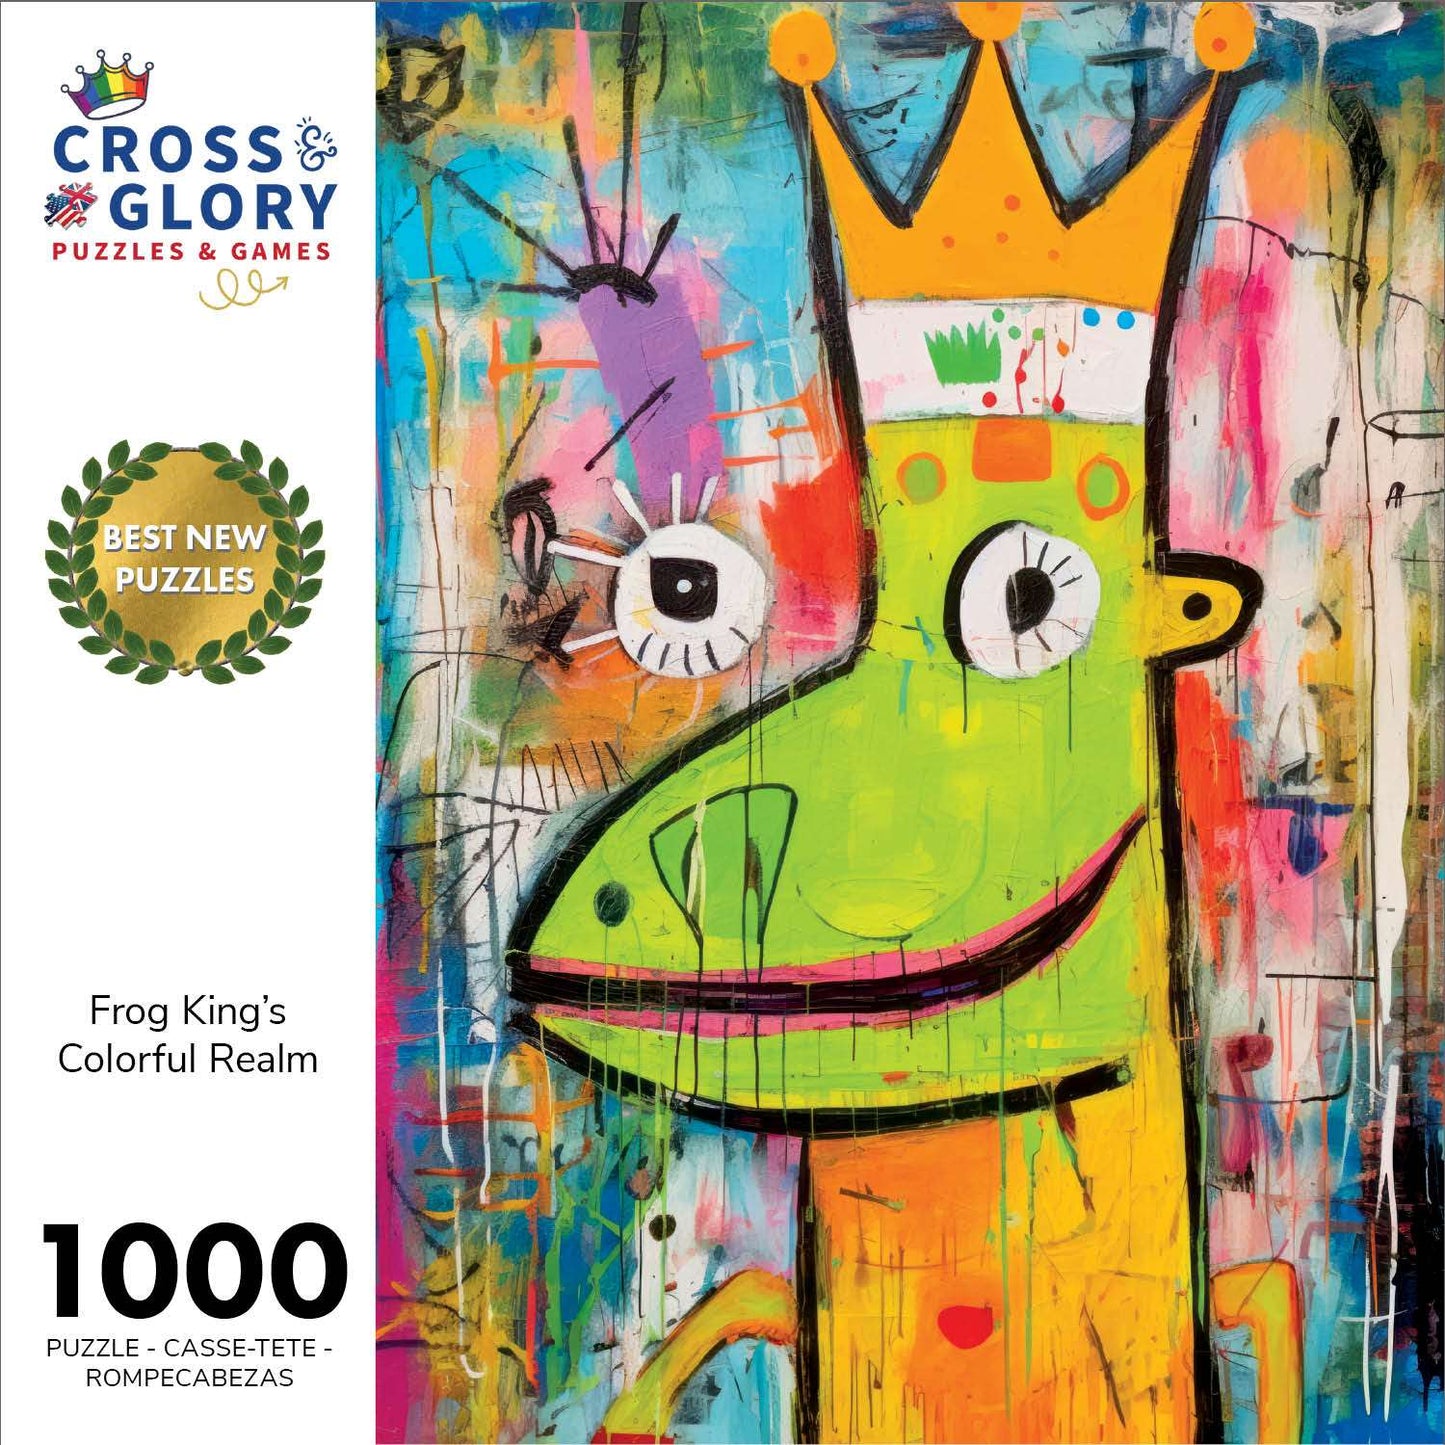 Frog King's Colorful Realm - 1000 Piece Jigsaw Puzzle - Ships Nov. '23